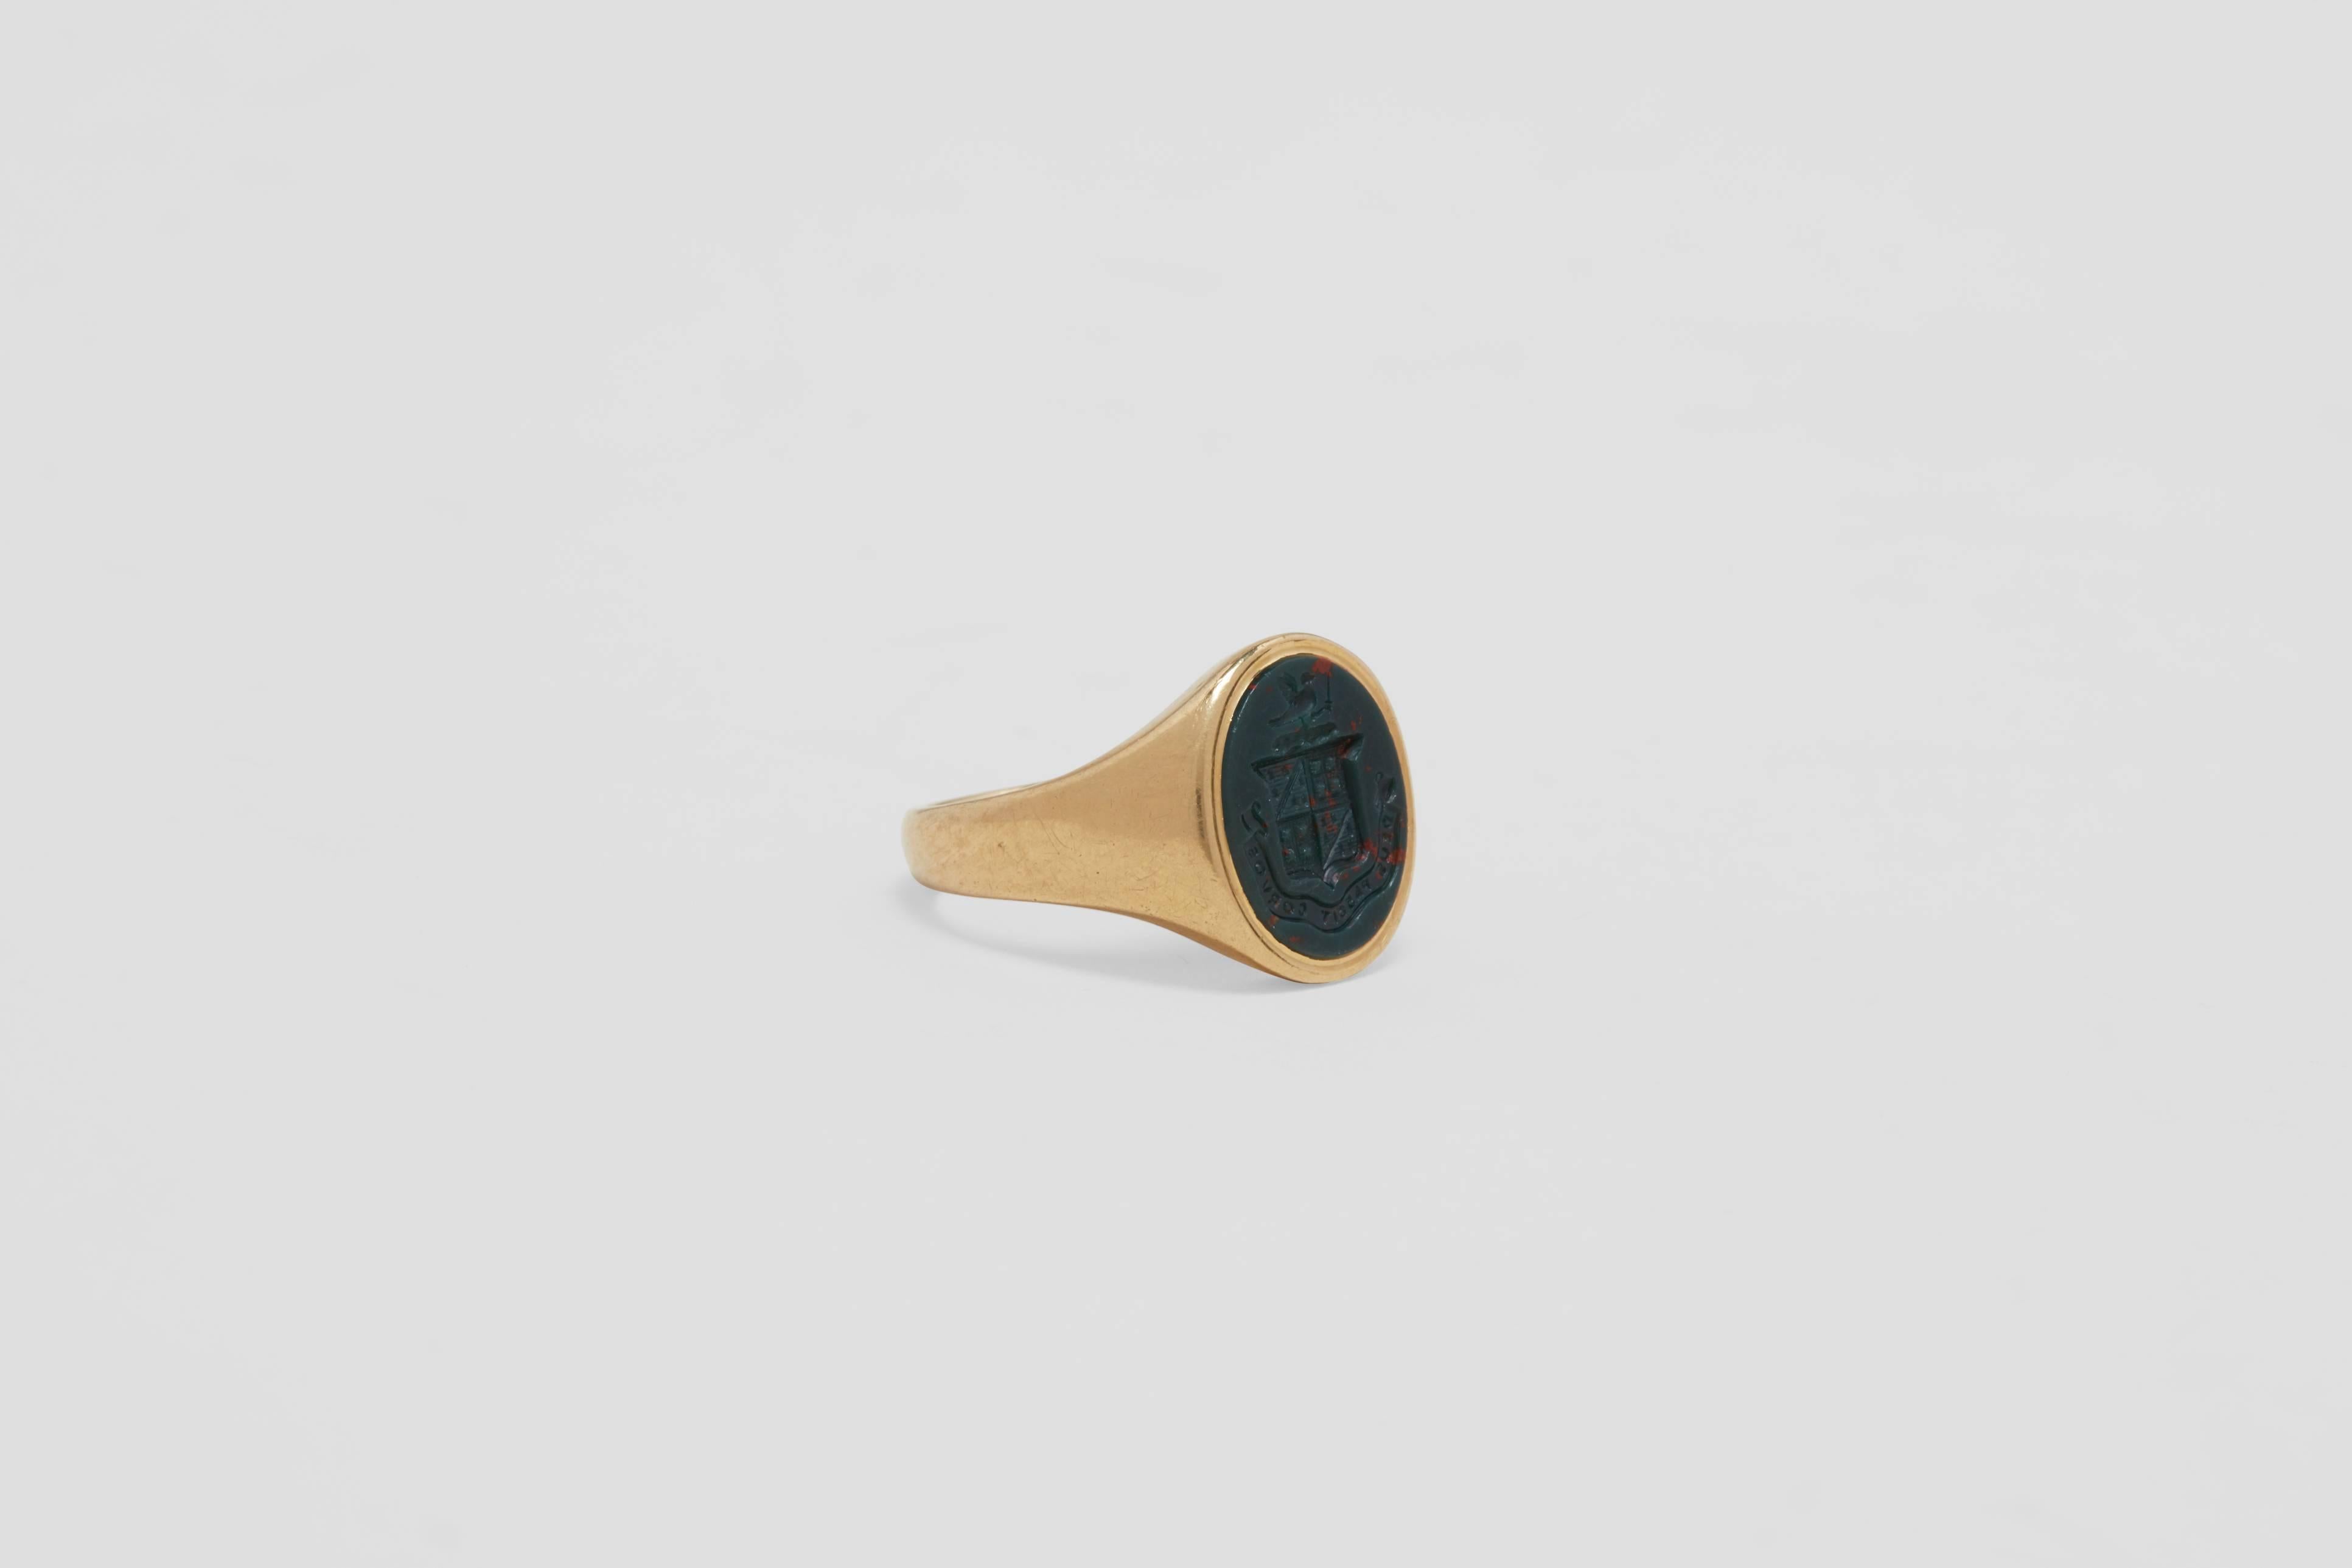 A solid eighteen carat gold gentleman's signet ring with a classic oval shaped, heraldic hand carved, bloodstone.  This iconic style ring, worn by noblemen and kings for centuries, is made in eighteen carat yellow gold.

A classic signet ring